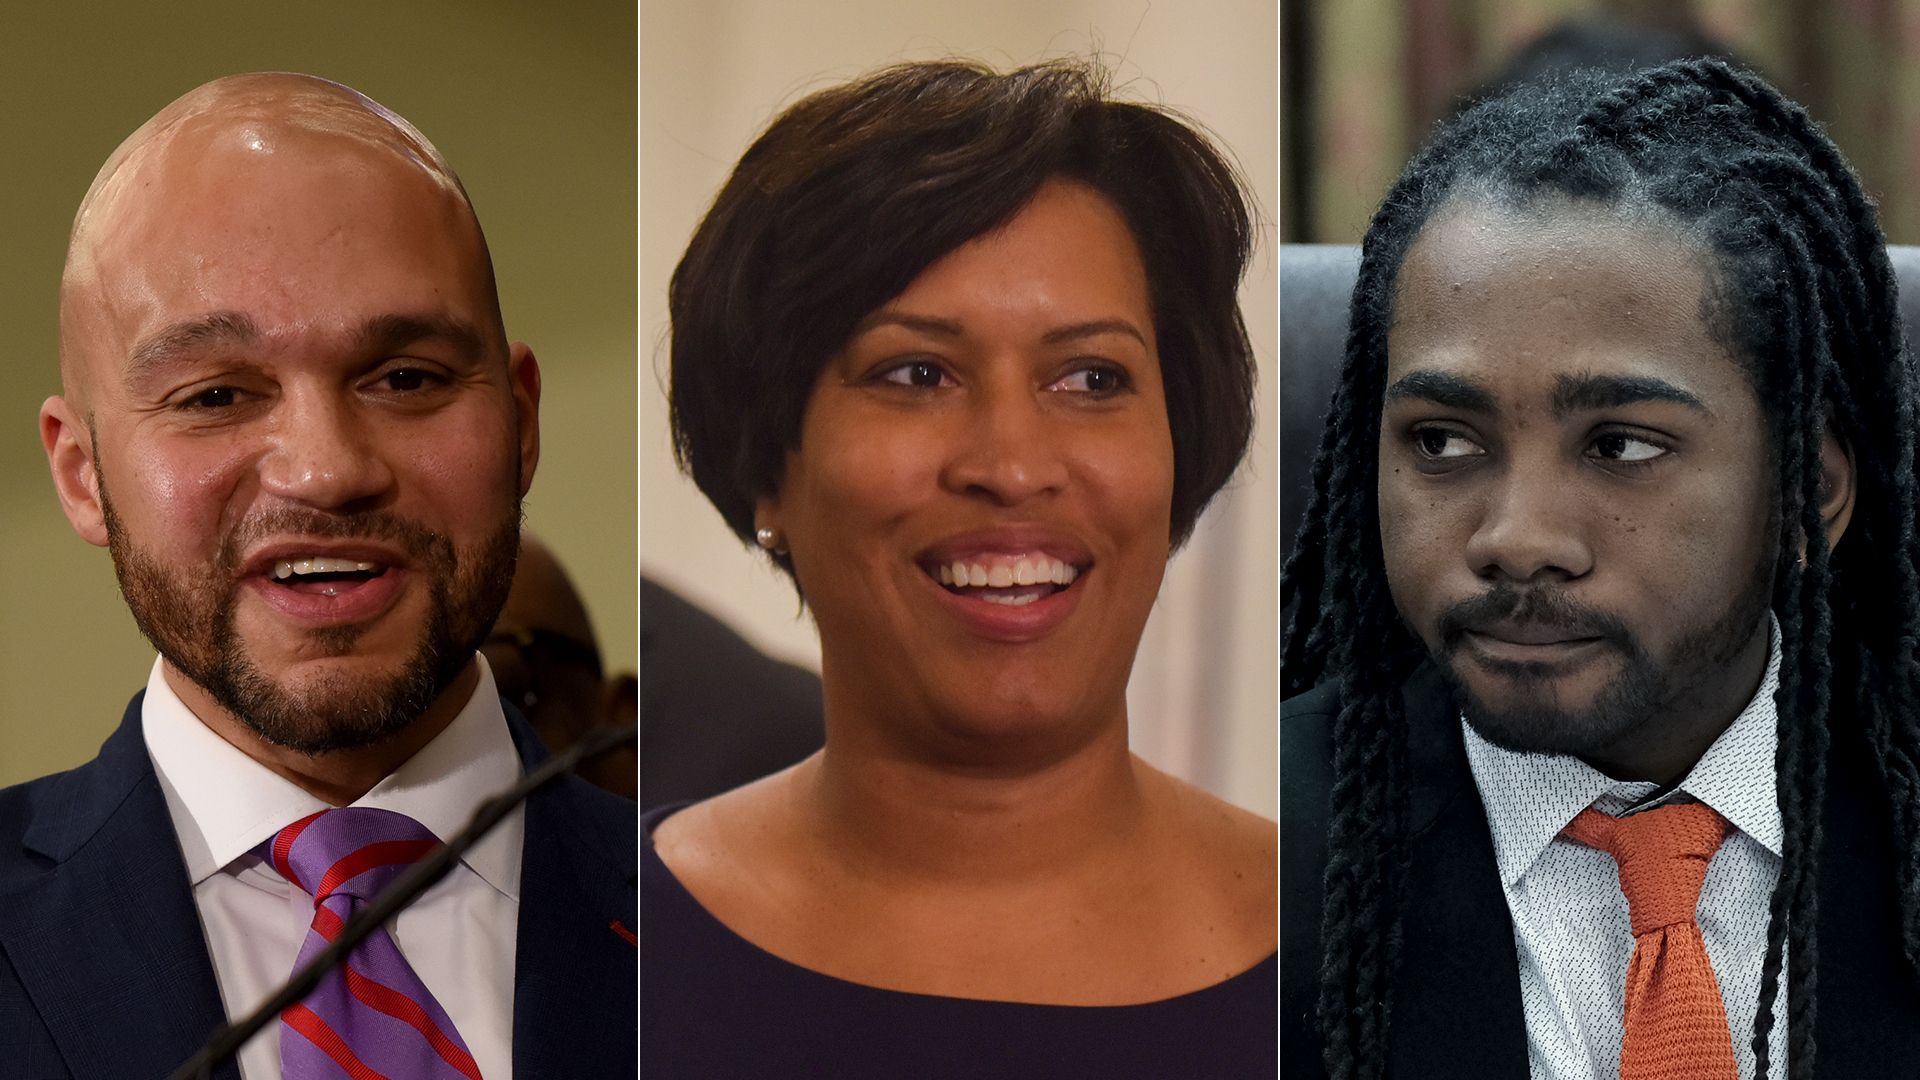 Robert White, Muriel Bowser and Trayon White photos